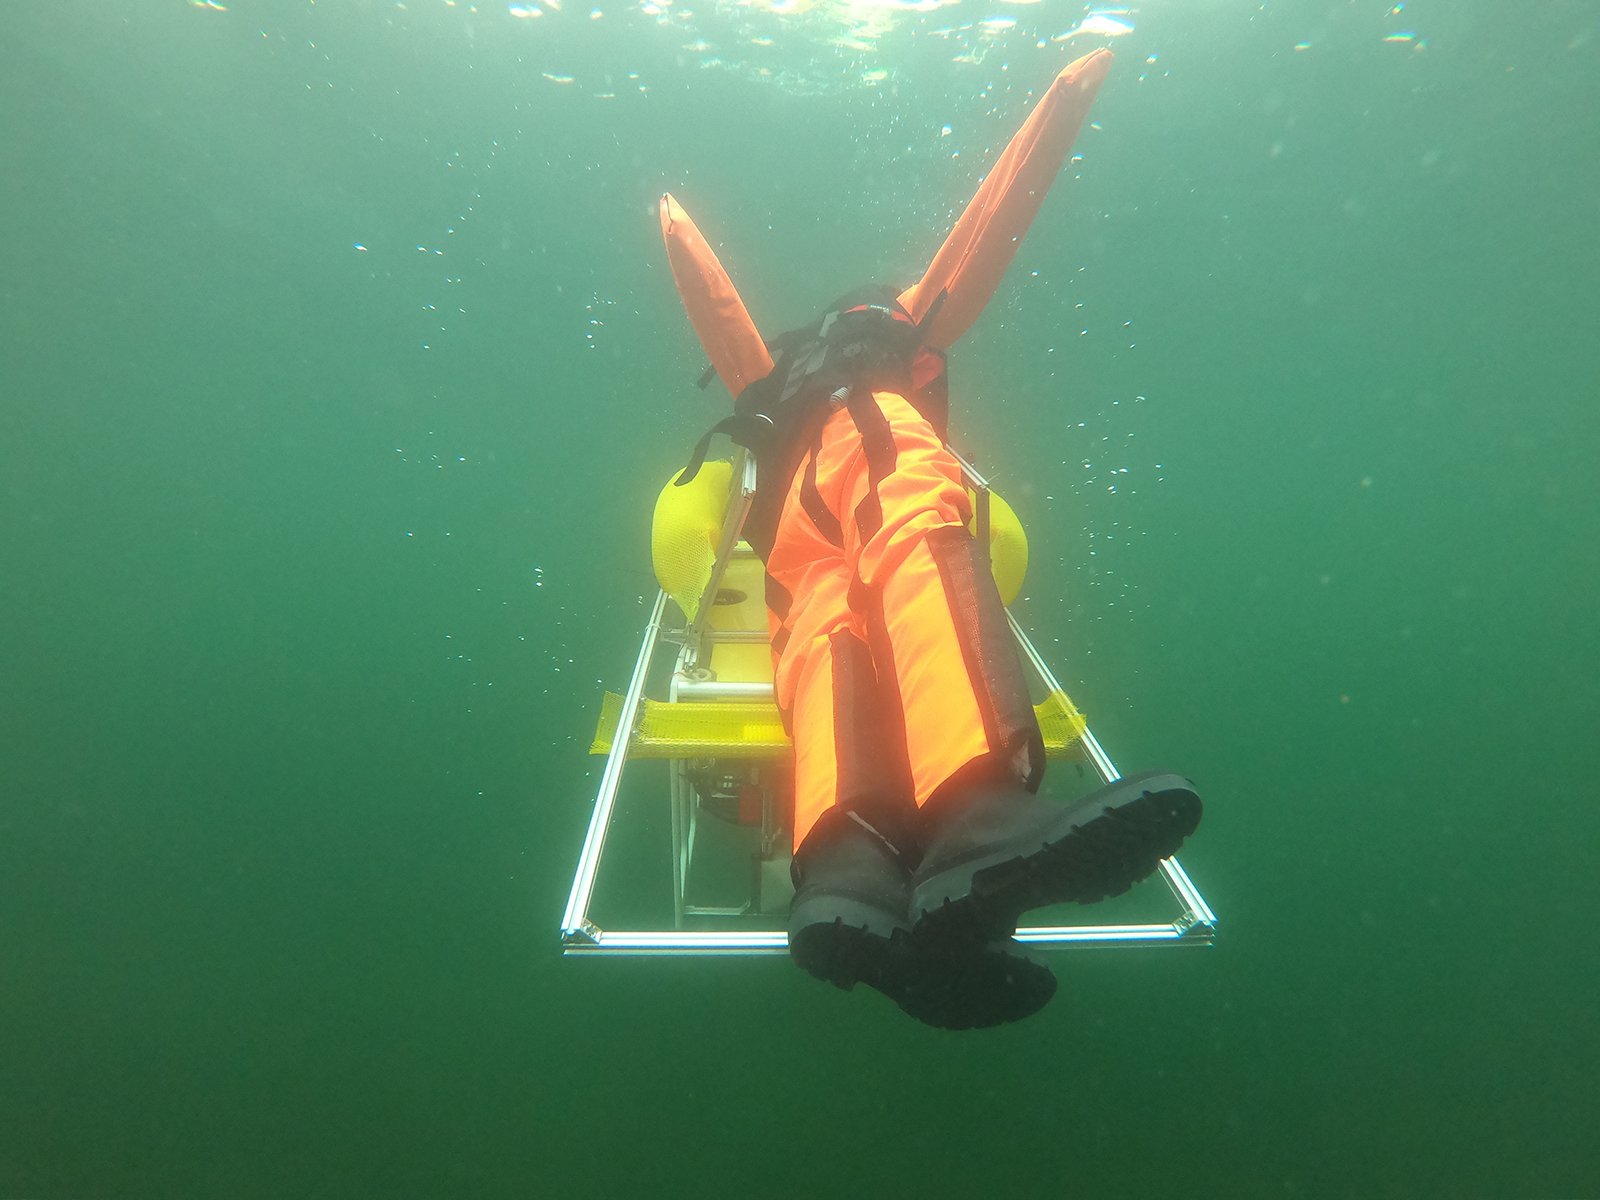 During testing at the Hufeisensee lake, the dummy did not slip out of the securing mechanism as it was taken to the surface.